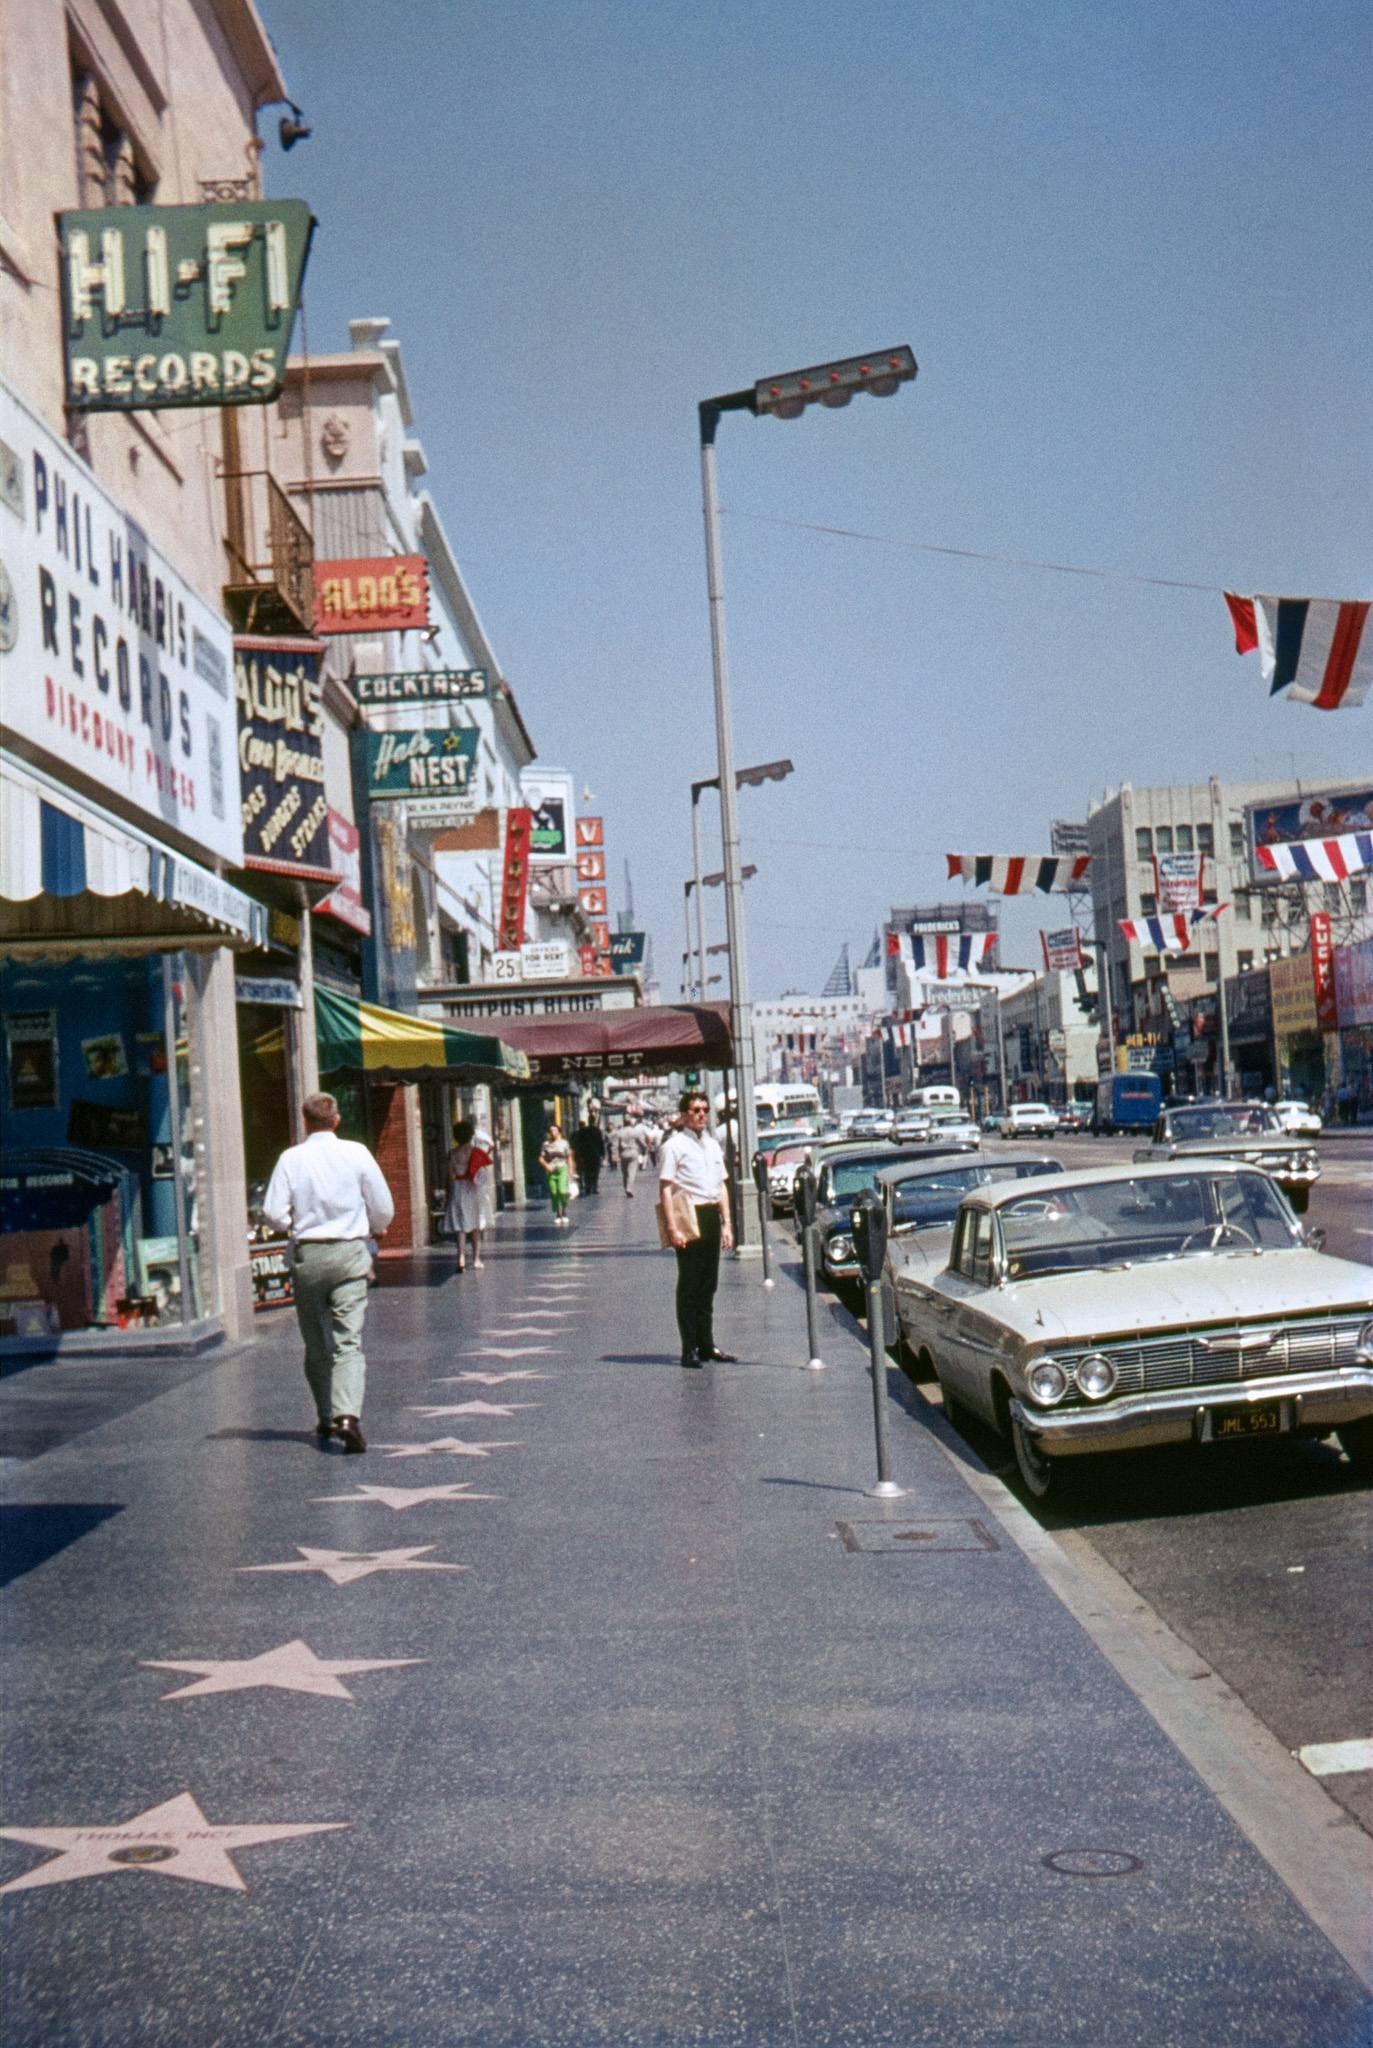 Shorpy Historical Picture Archive :: Hollywood Blvd.: 1963 high